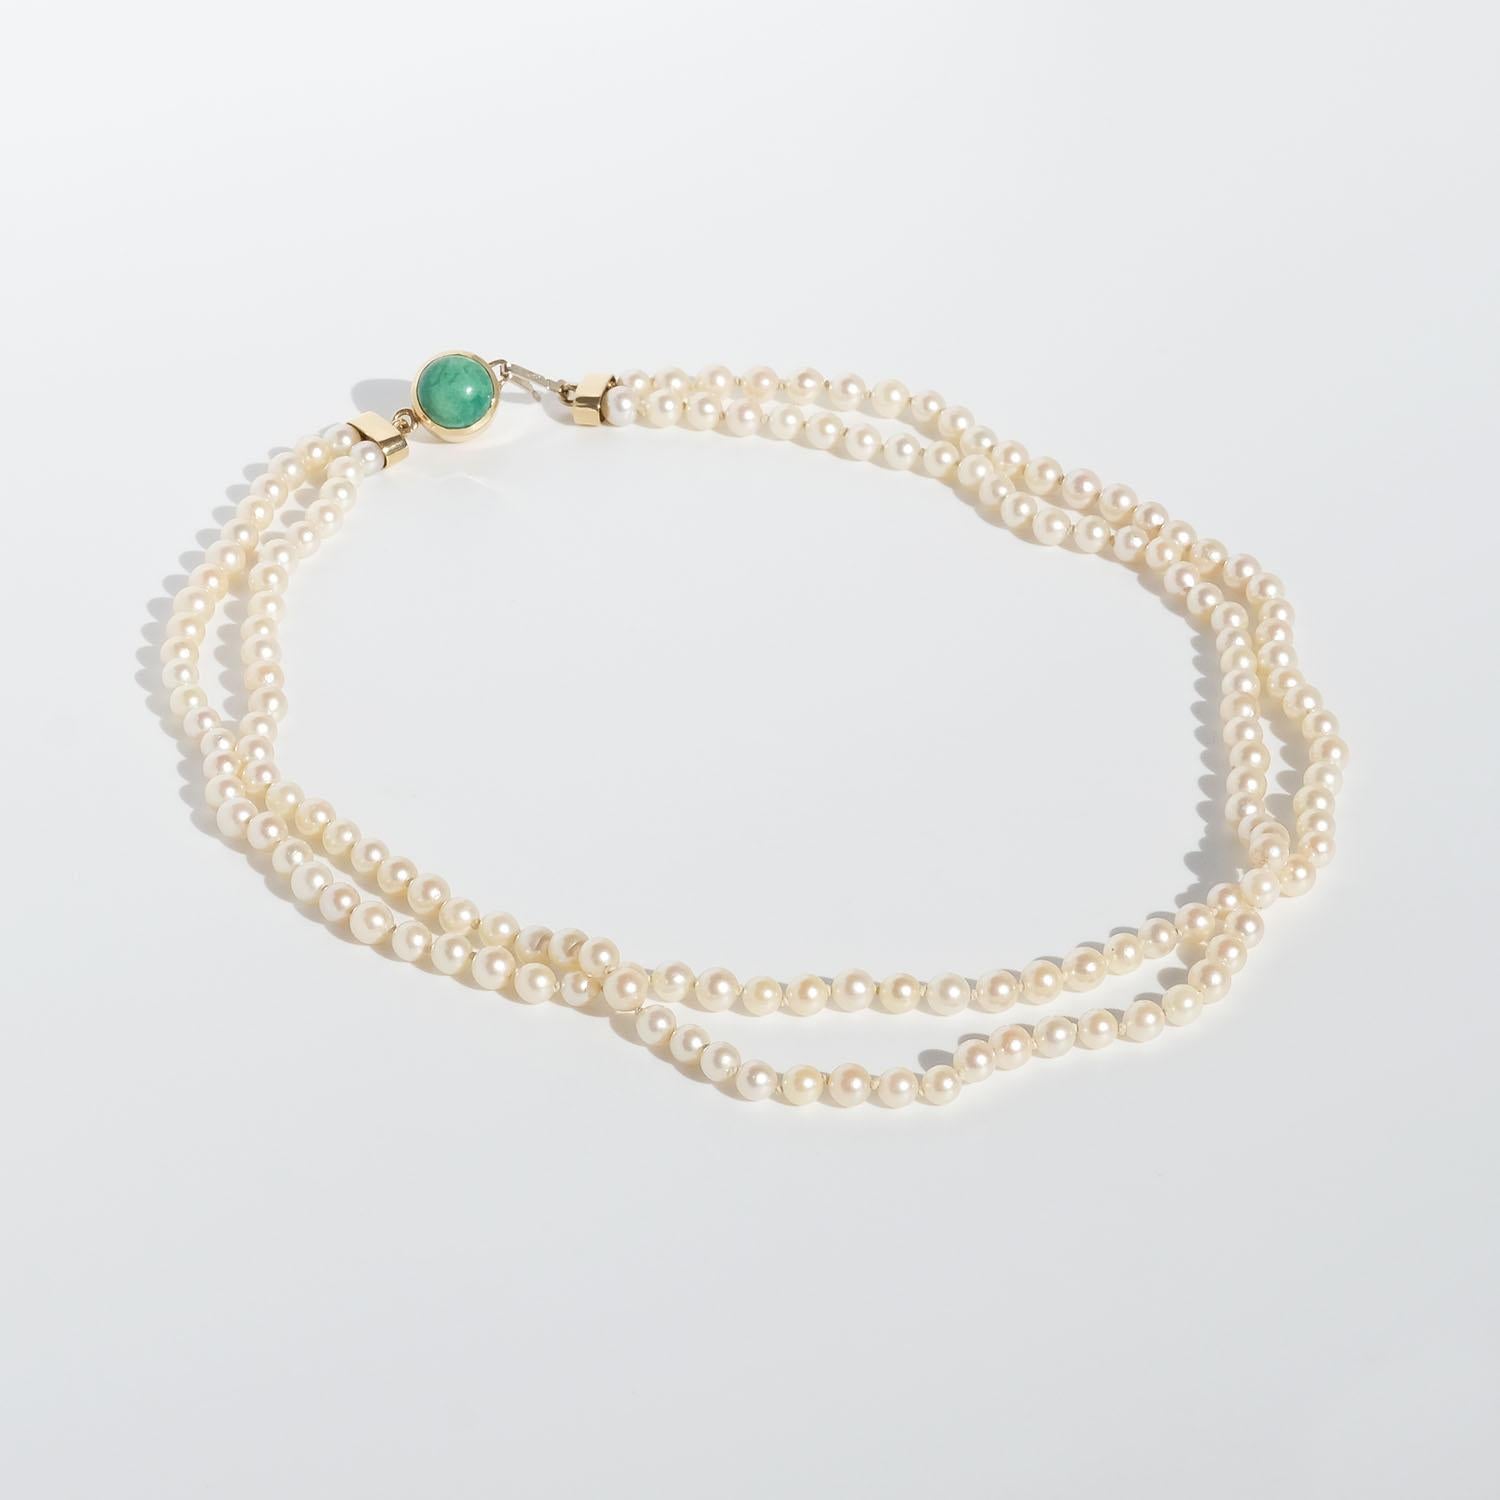 This double strand pearl necklace has cultured pearls with a beautiful creamy color. The necklace closes with a 18 karat gold hook which fastens in a bracket decorated with a green stone.

No matter if your style skews more minimalist or if you want